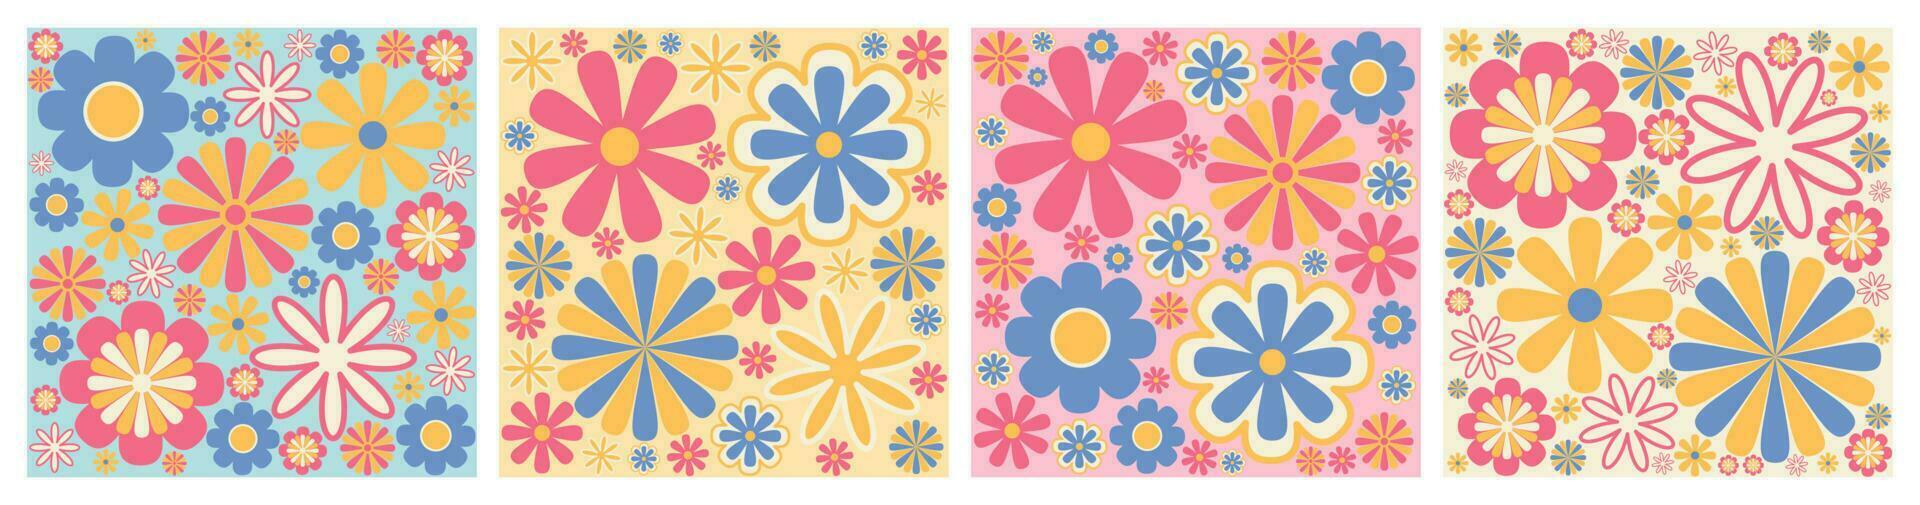 Abstract retro aesthetic backgrounds set with groovy daisy flowers. Vintage floral mid century art prints. Hippie 60s, 70s, 80s style. Danish pastel wall art. vector